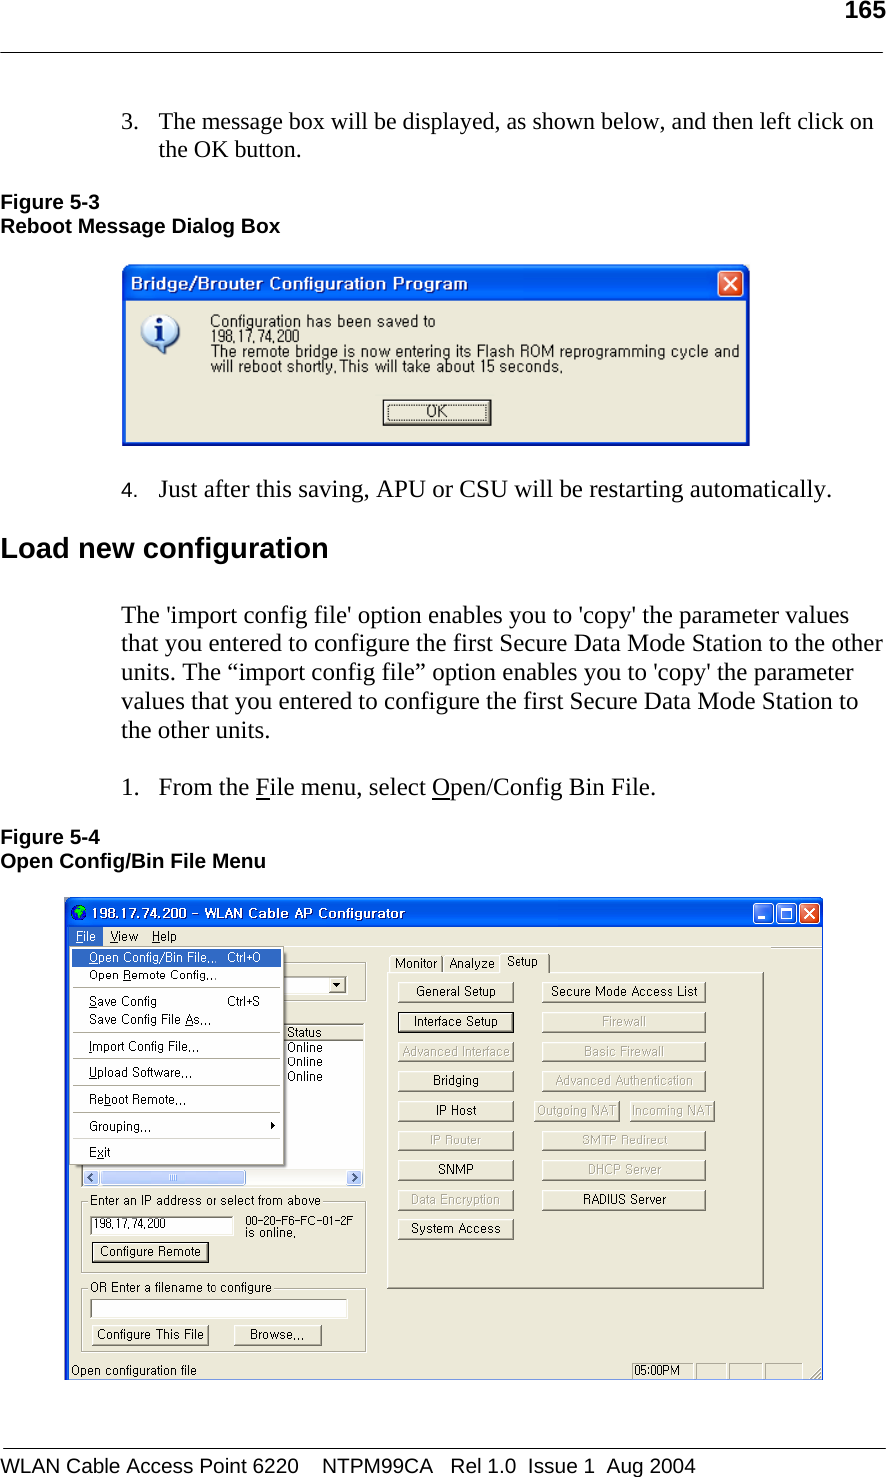   165  3. The message box will be displayed, as shown below, and then left click on the OK button.  Figure 5-3 Reboot Message Dialog Box    4.  Just after this saving, APU or CSU will be restarting automatically.  Load new configuration  The &apos;import config file&apos; option enables you to &apos;copy&apos; the parameter values that you entered to configure the first Secure Data Mode Station to the other units. The “import config file” option enables you to &apos;copy&apos; the parameter values that you entered to configure the first Secure Data Mode Station to the other units.  1. From the File menu, select Open/Config Bin File.  Figure 5-4 Open Config/Bin File Menu    WLAN Cable Access Point 6220    NTPM99CA   Rel 1.0  Issue 1  Aug 2004 